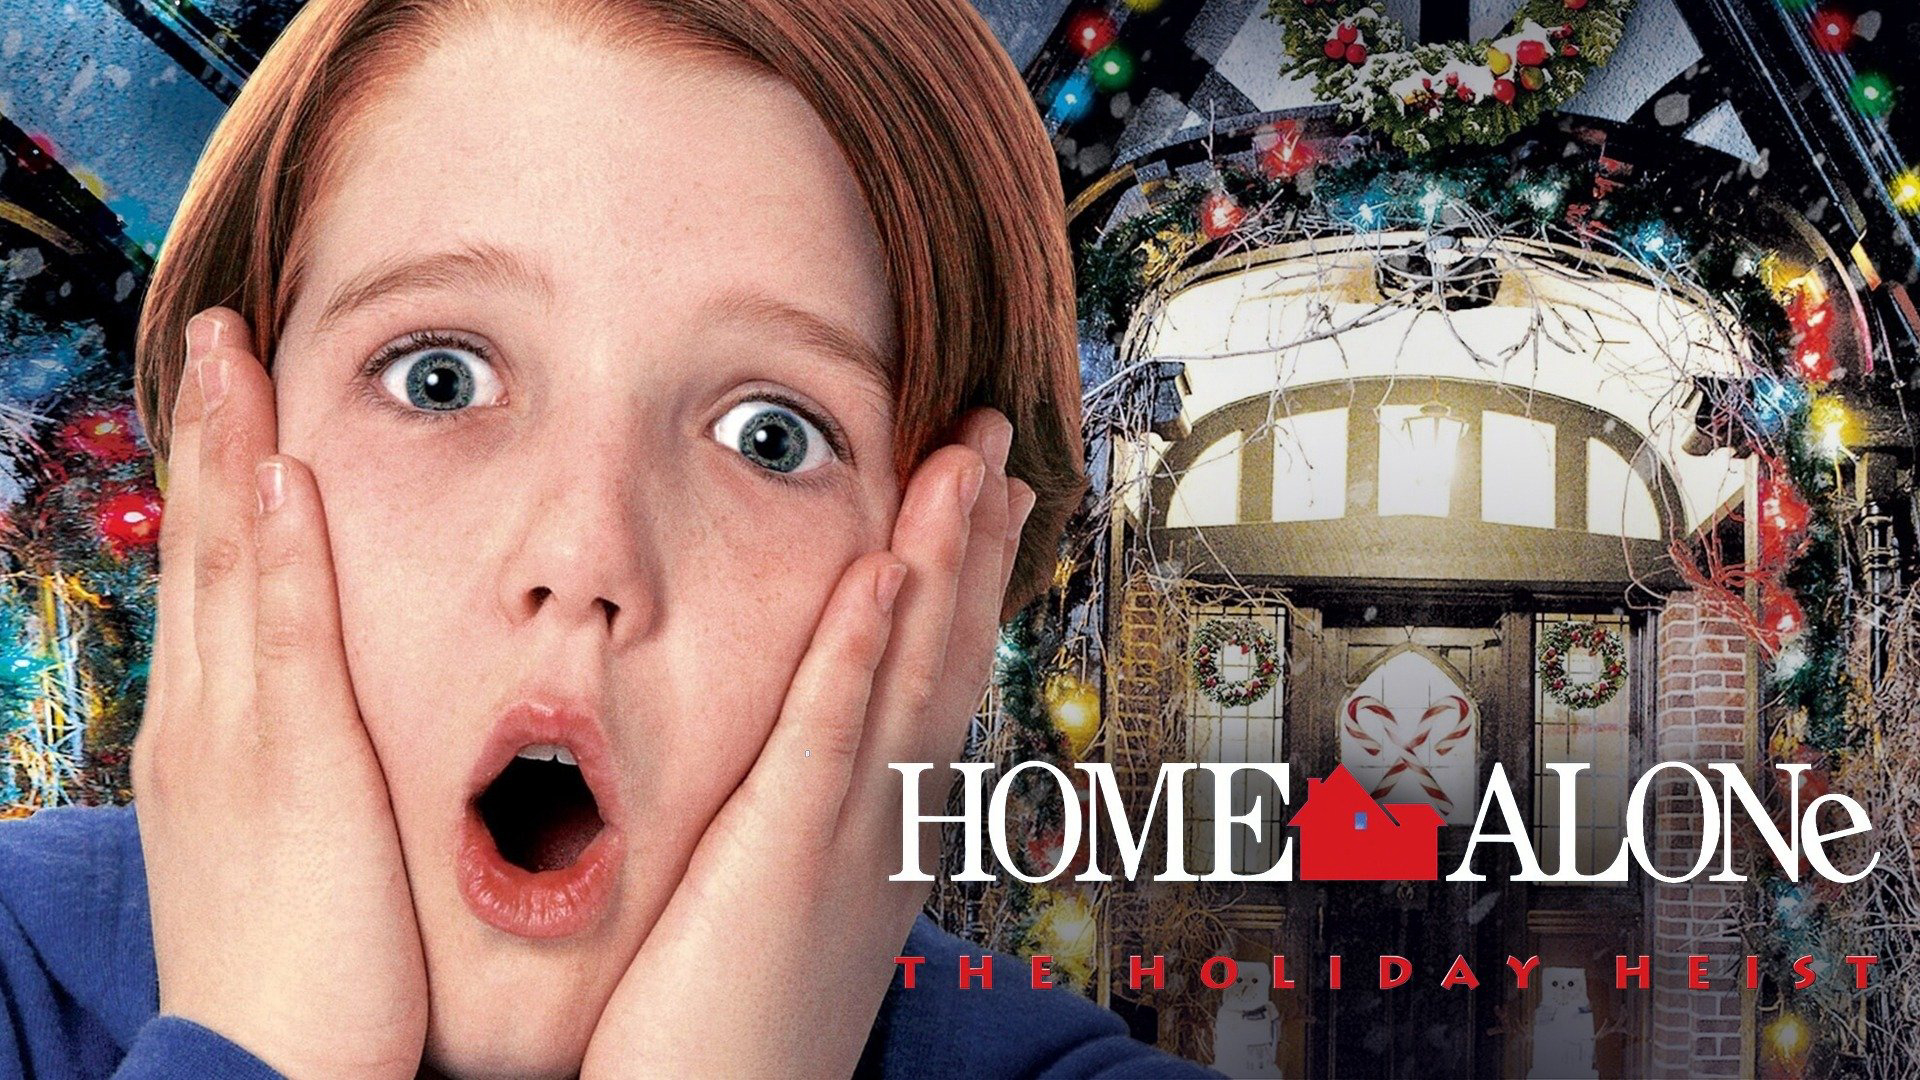 Home Alone: The Holiday Heist / Home Alone: The Holiday Heist (2012)